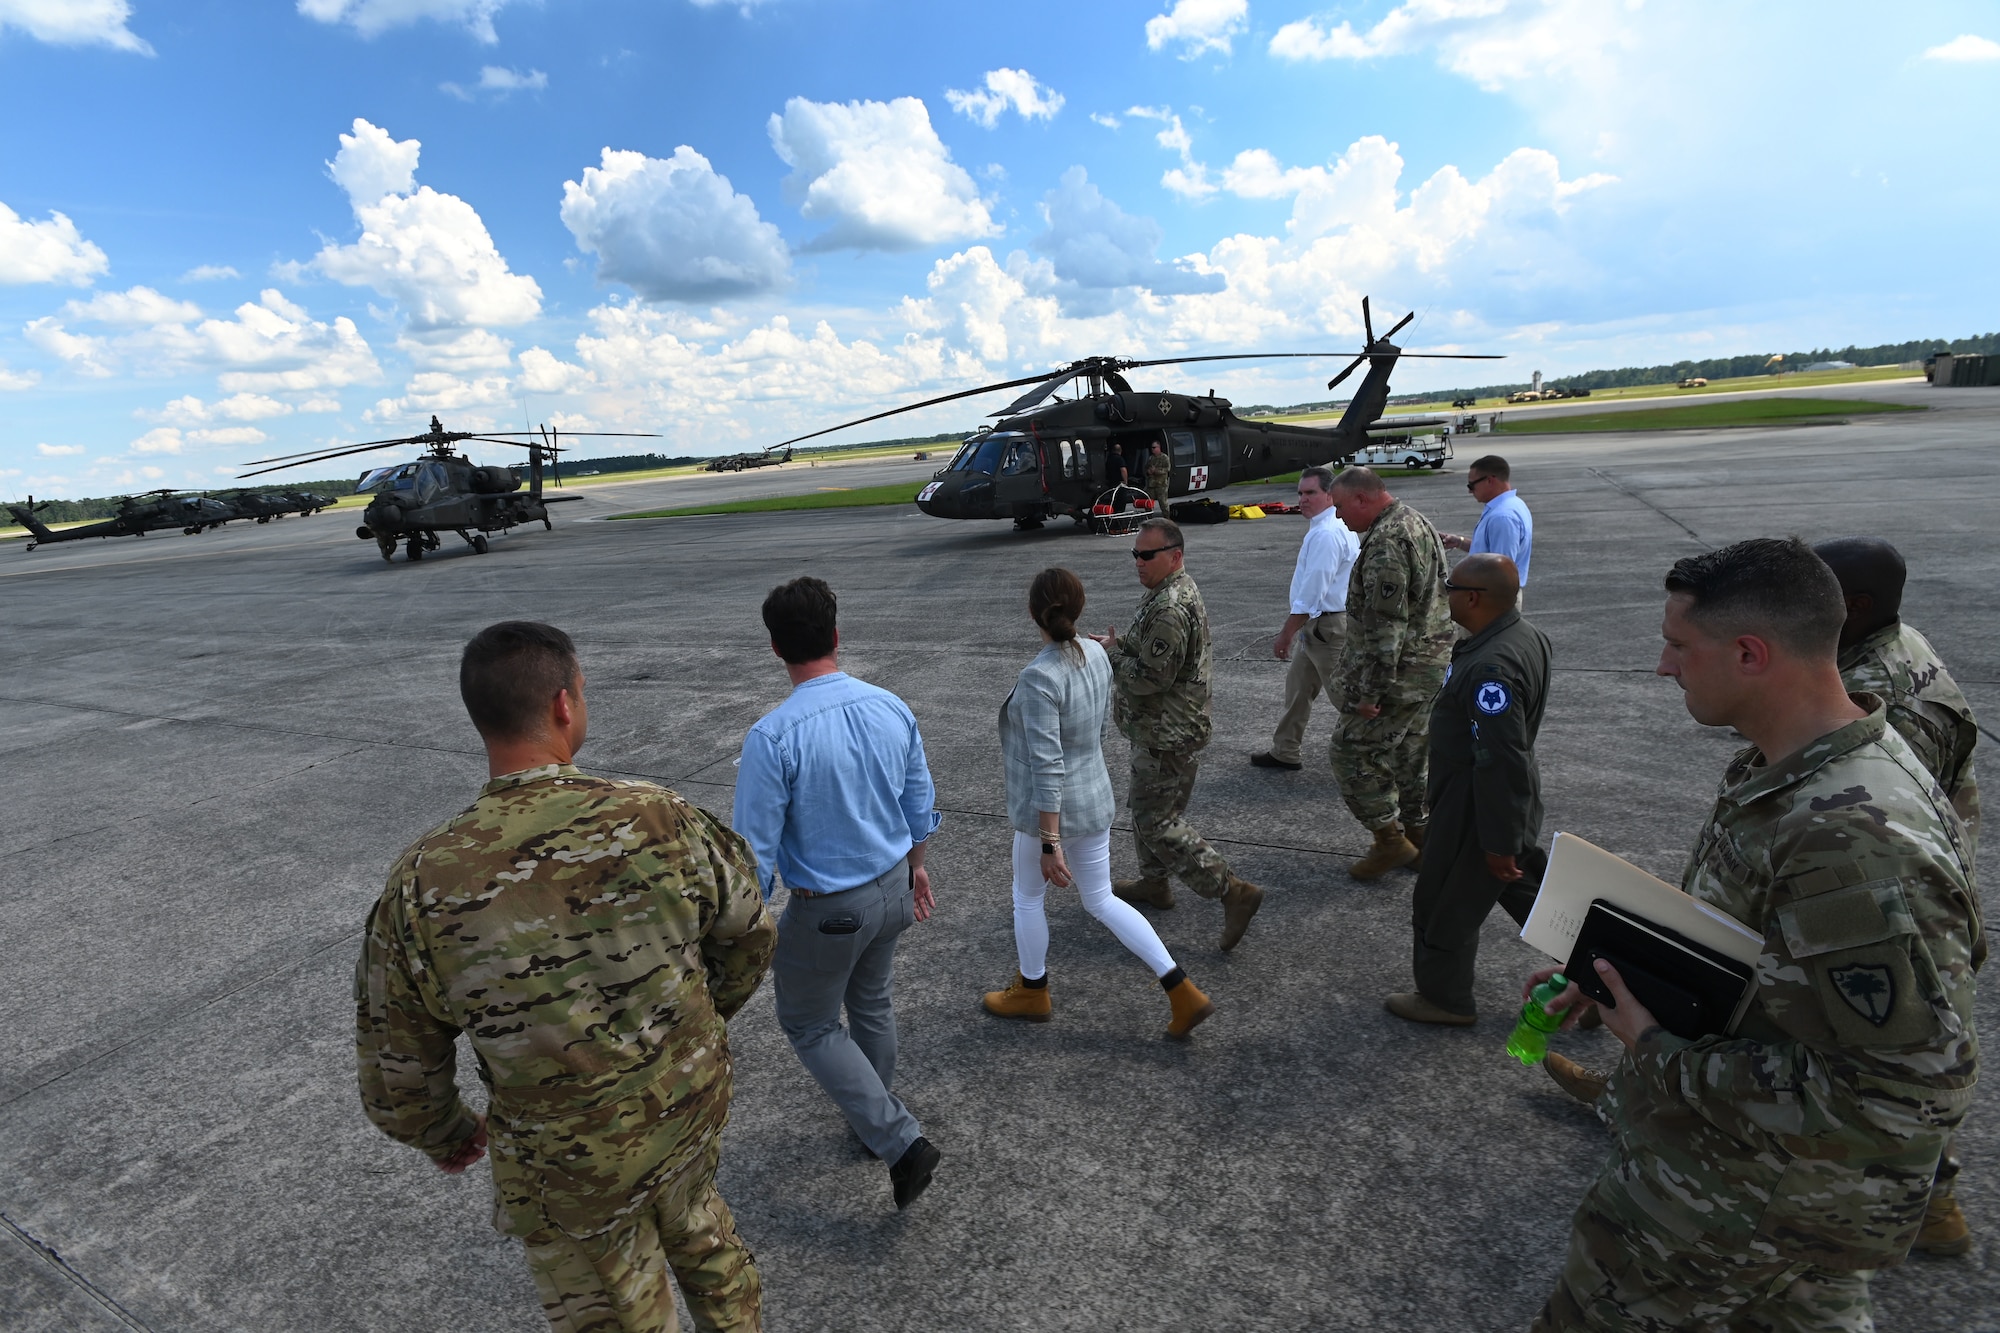 U.S. Rep. Nancy Mace and her staff from Charleston, South Carolina join leaders of the South Carolina National Guard on a tour of the helicopter flight line at McEntire Joint National Guard Base, South Carolina during her visit Aug. 19, 2021. The purpose of her visit is to meet with South Carolina National Guard leadership to discuss the current state of the South Carolina National Guard and future endeavors for the organization as well as a familiarization of the base and the capabilities of the units housed there. (U.S. Air National Guard photo by Senior Master Sgt. Edward Snyder, 169th Fighter Wing Public Affairs)